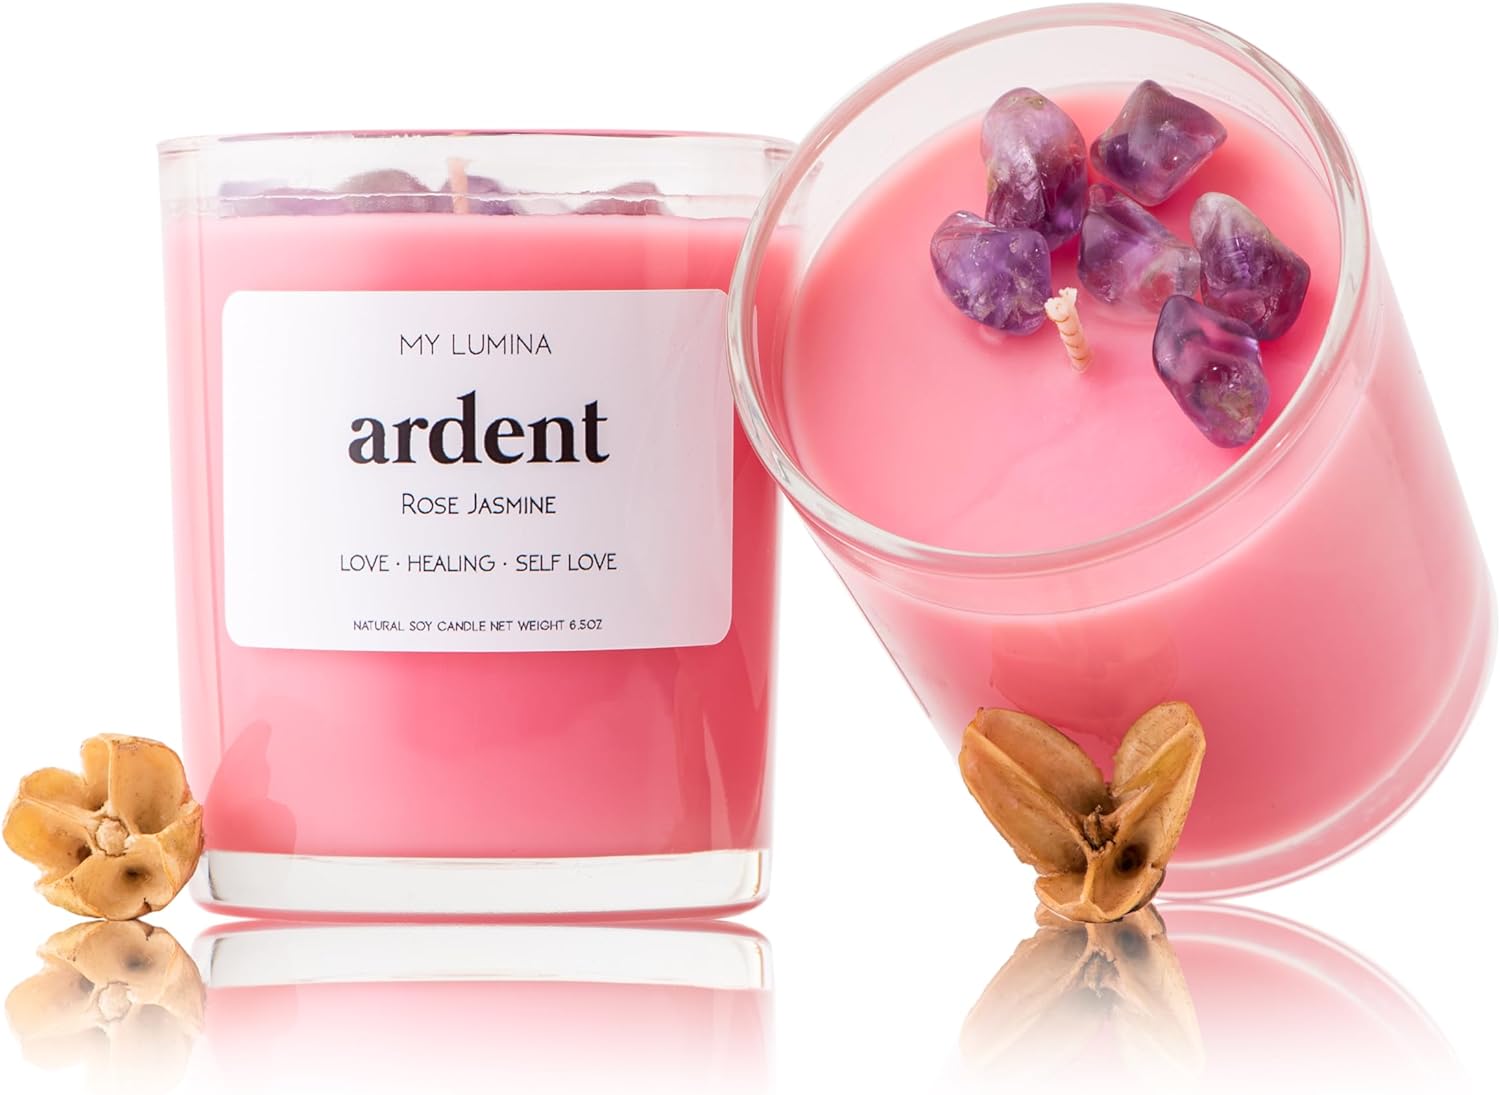 My Lumina Ardent Love Pink Candle - Romantic Sweet Love Candle Natural Soy Wax - Rose and Jasmine Natural Scented Purifying Candle for Aromatherapy